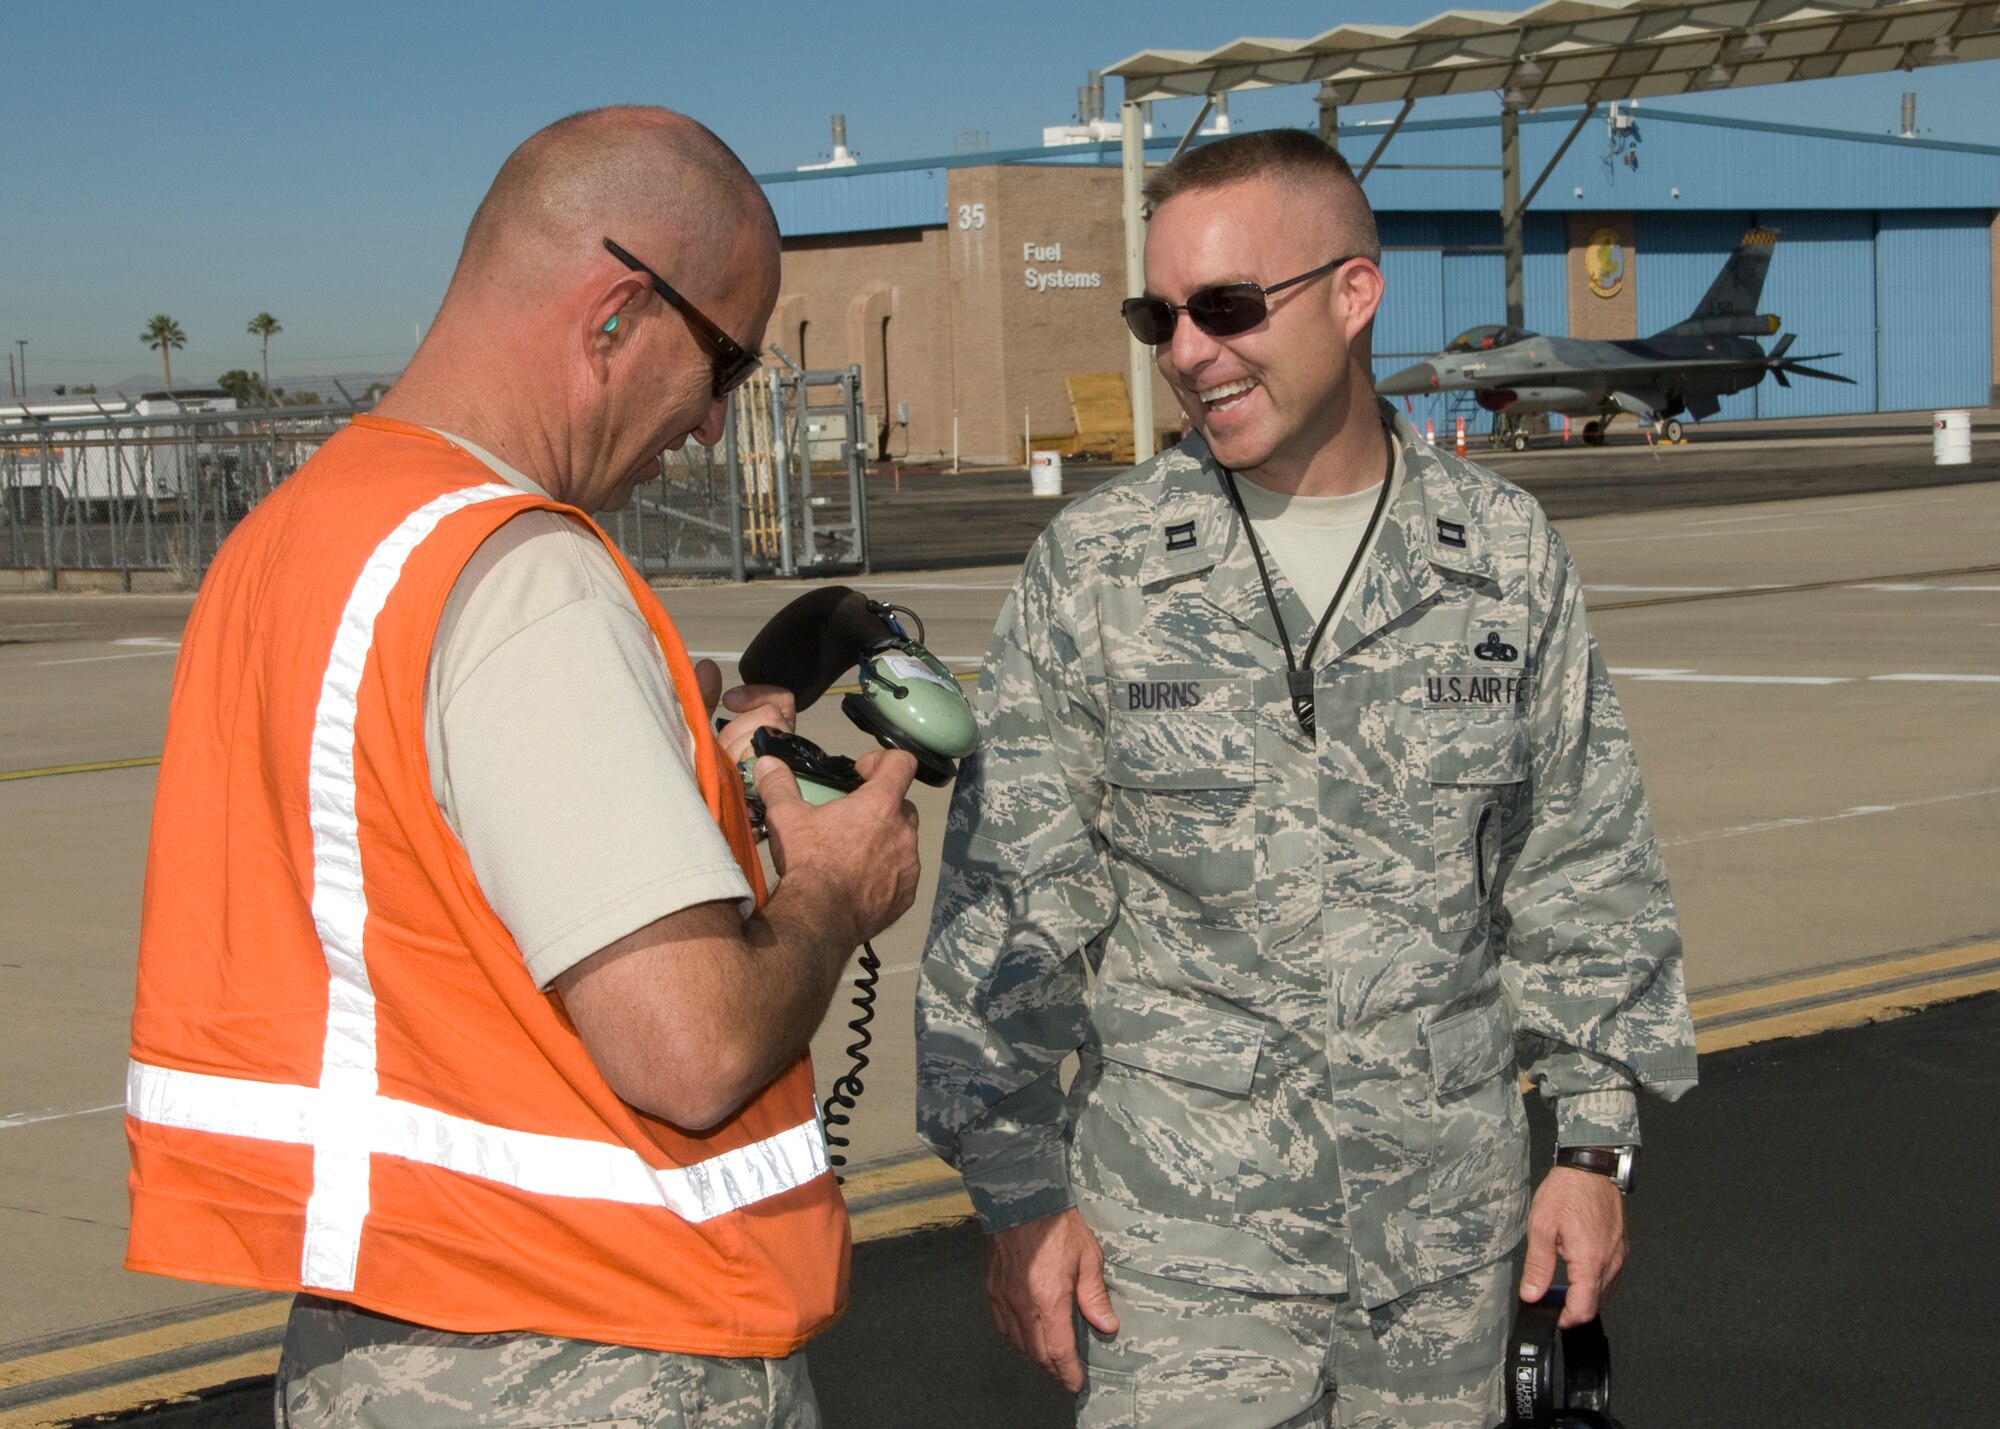 Capt. Jason Burns, a maintenance officer at the 162nd Fighter Wing, talks about maintenance issues on the flightline at Tucson International Airport. He is the Arizona Air National Guard’s outstanding junior officer for 2010. (U.S. Air Force photo/Master Sgt. Dave Neve)